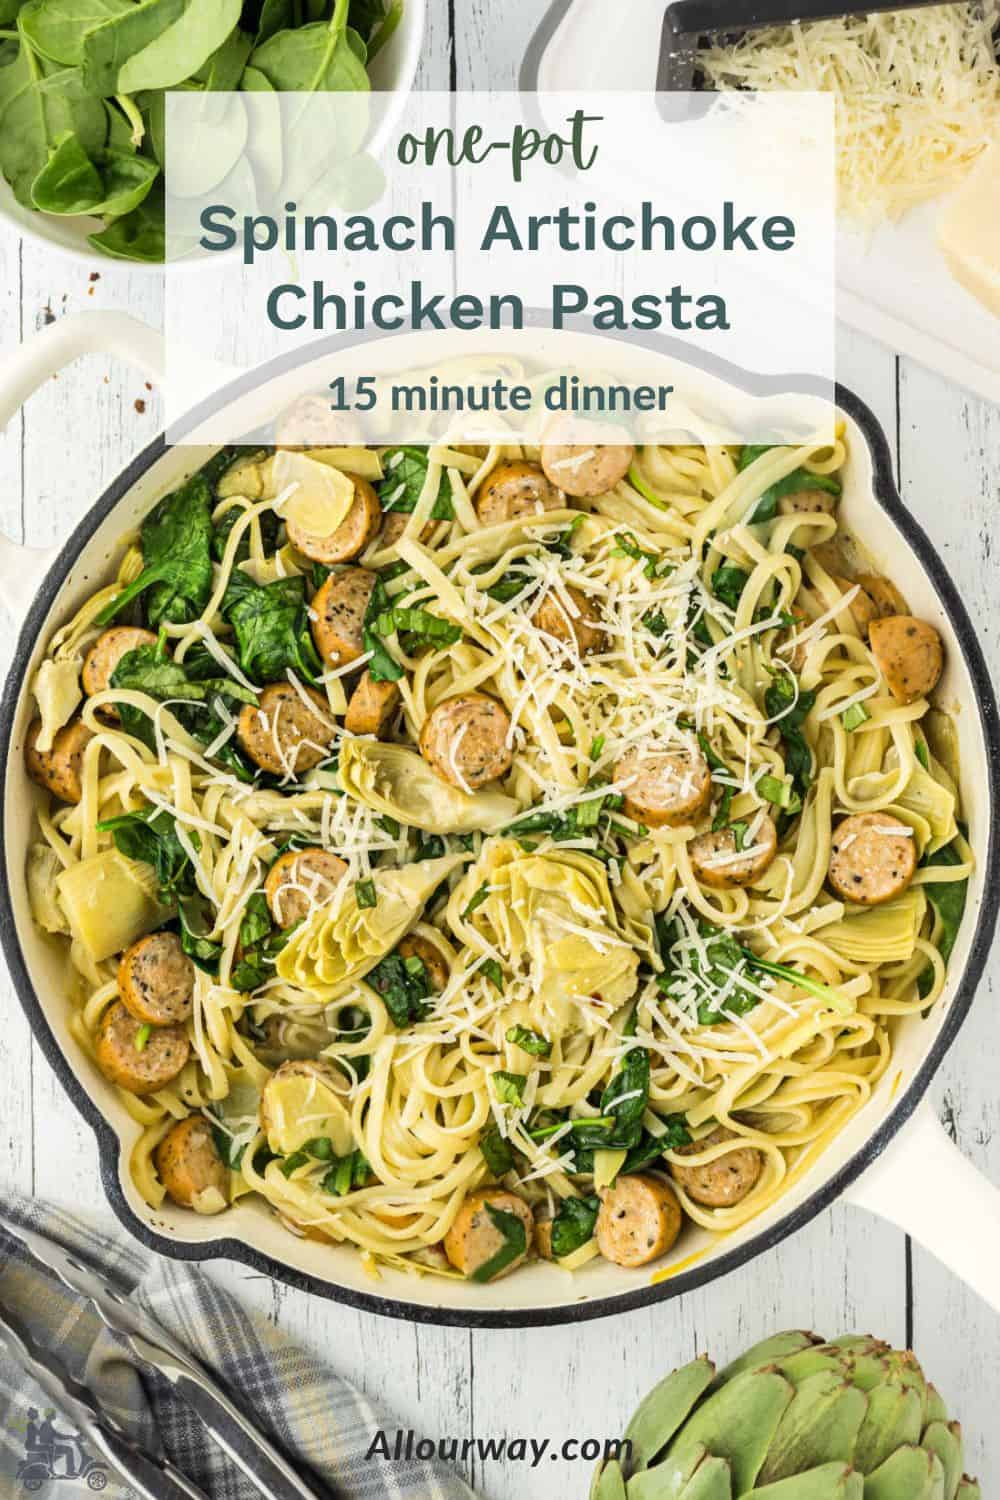 One pot chicken spaghetti made with spinach and artichoke hearts.